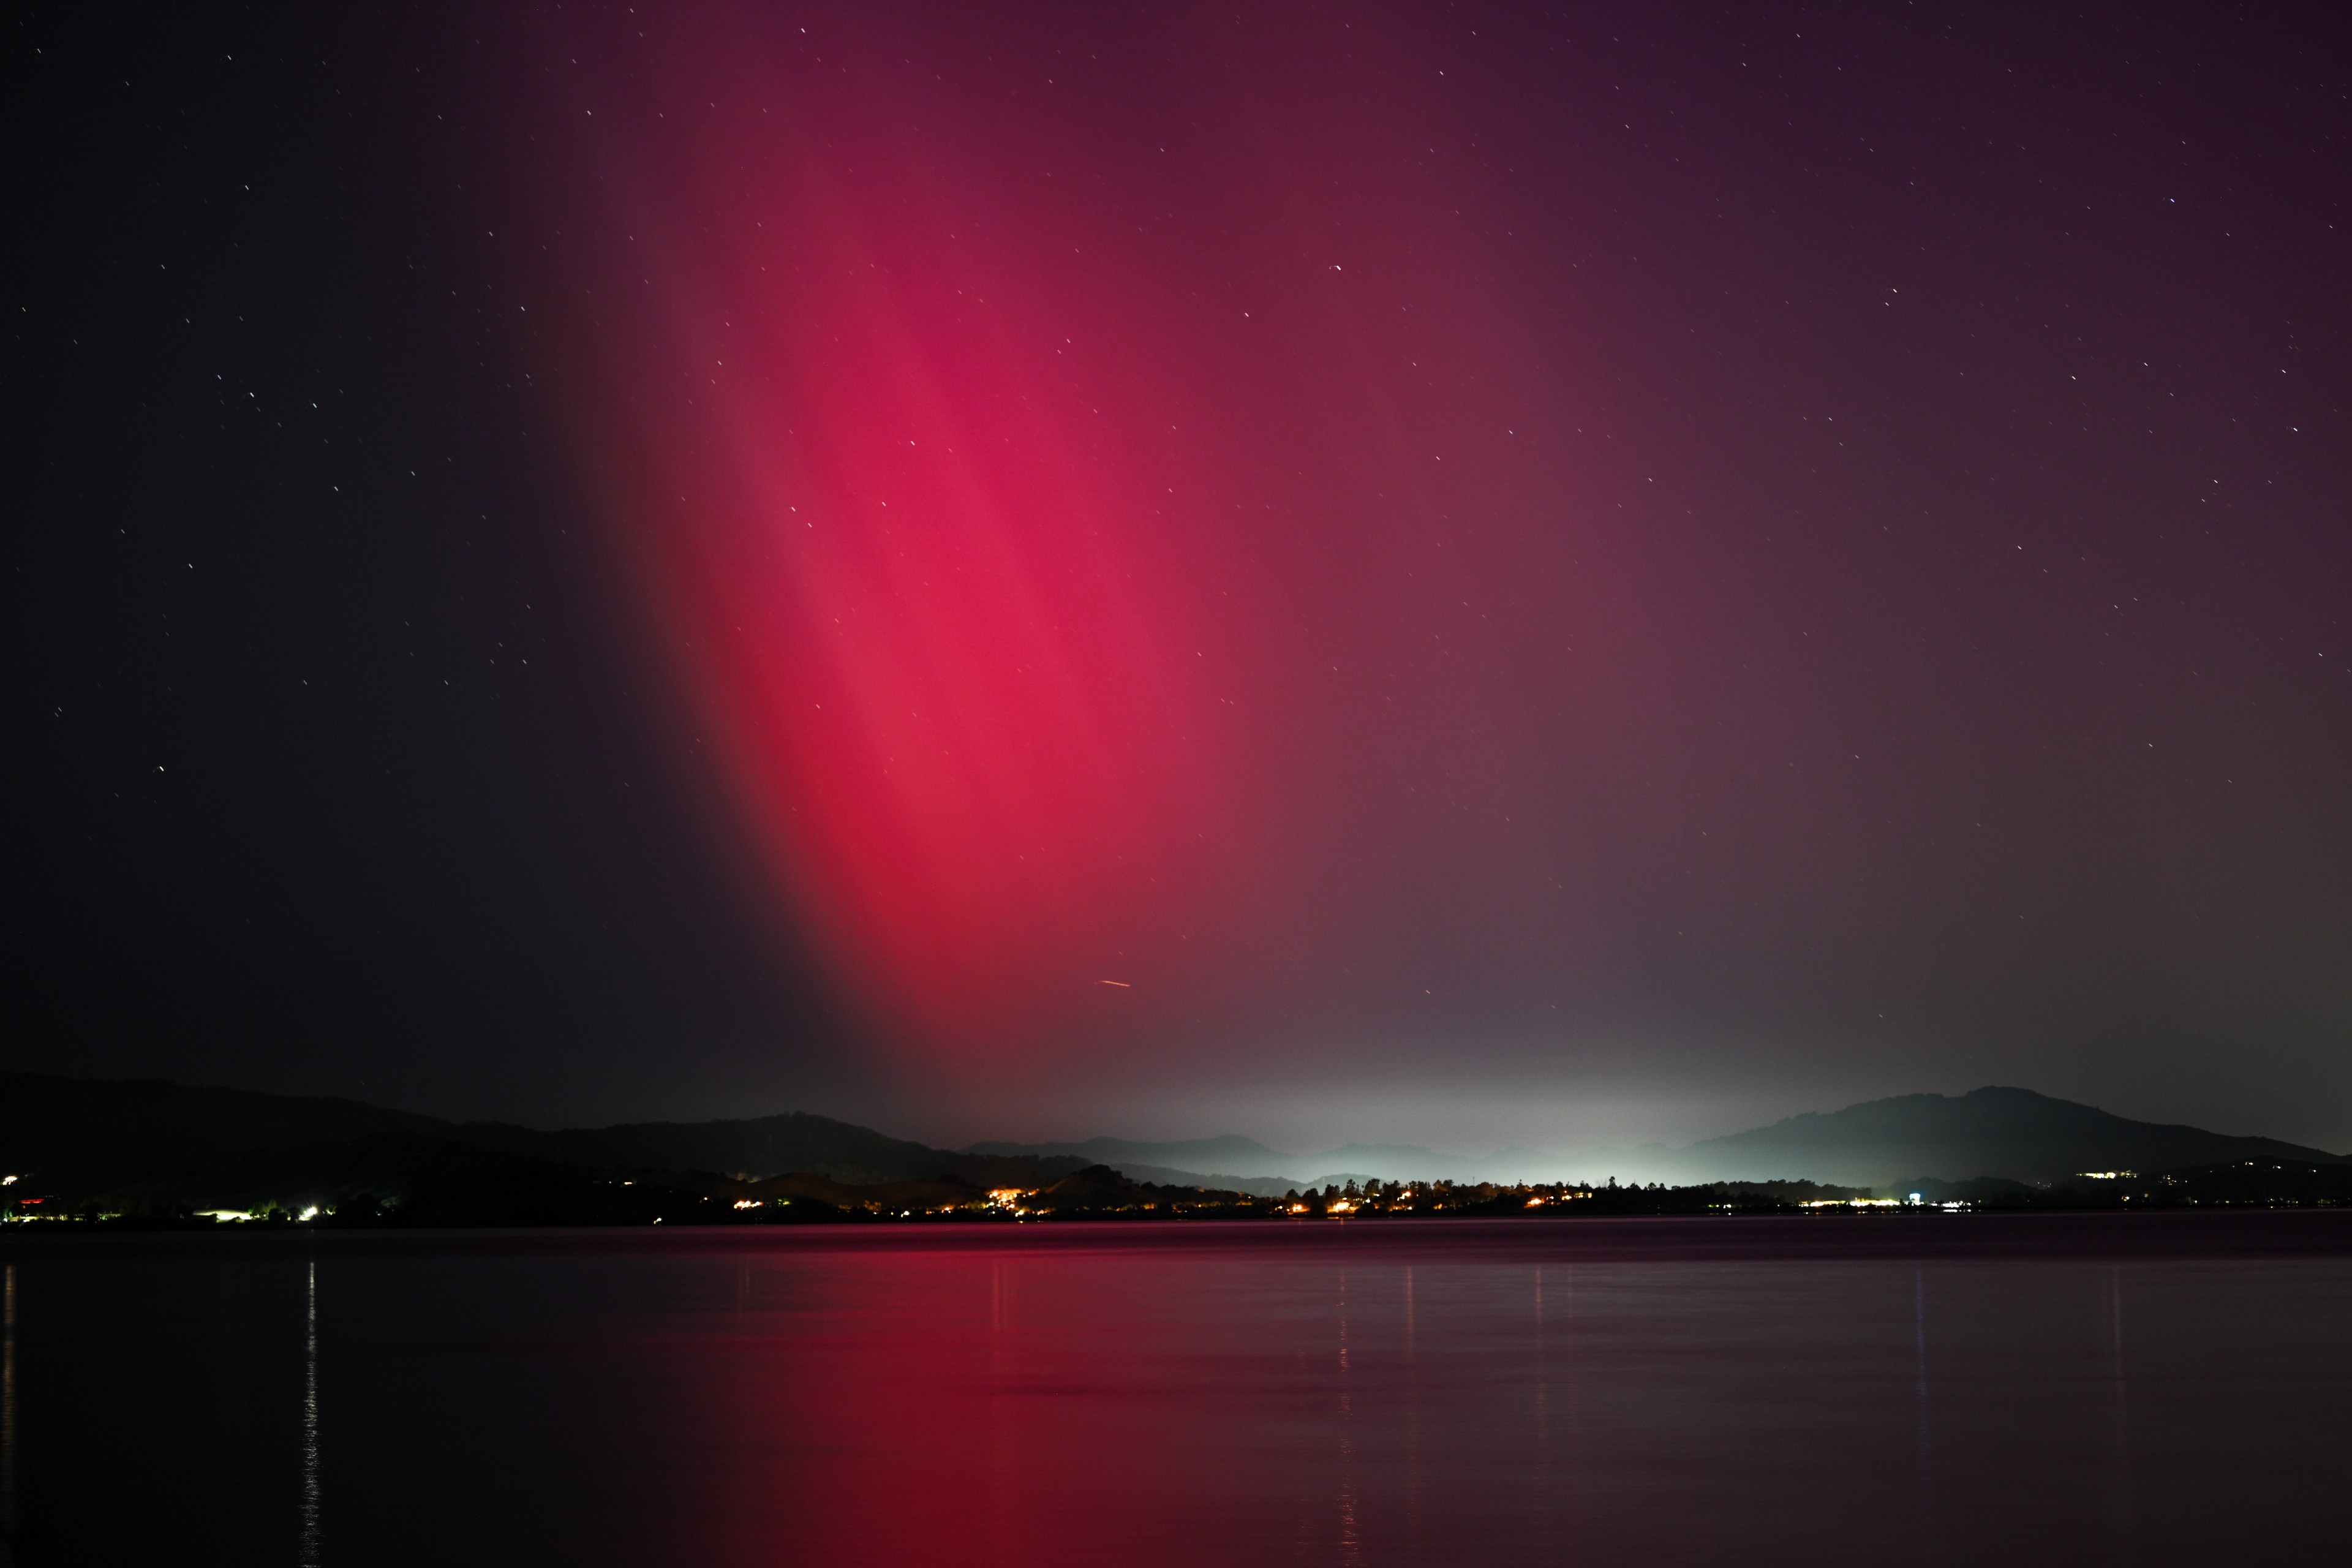 Red aurora-like lights streak across the night sky above glowing city lights and a calm lake.